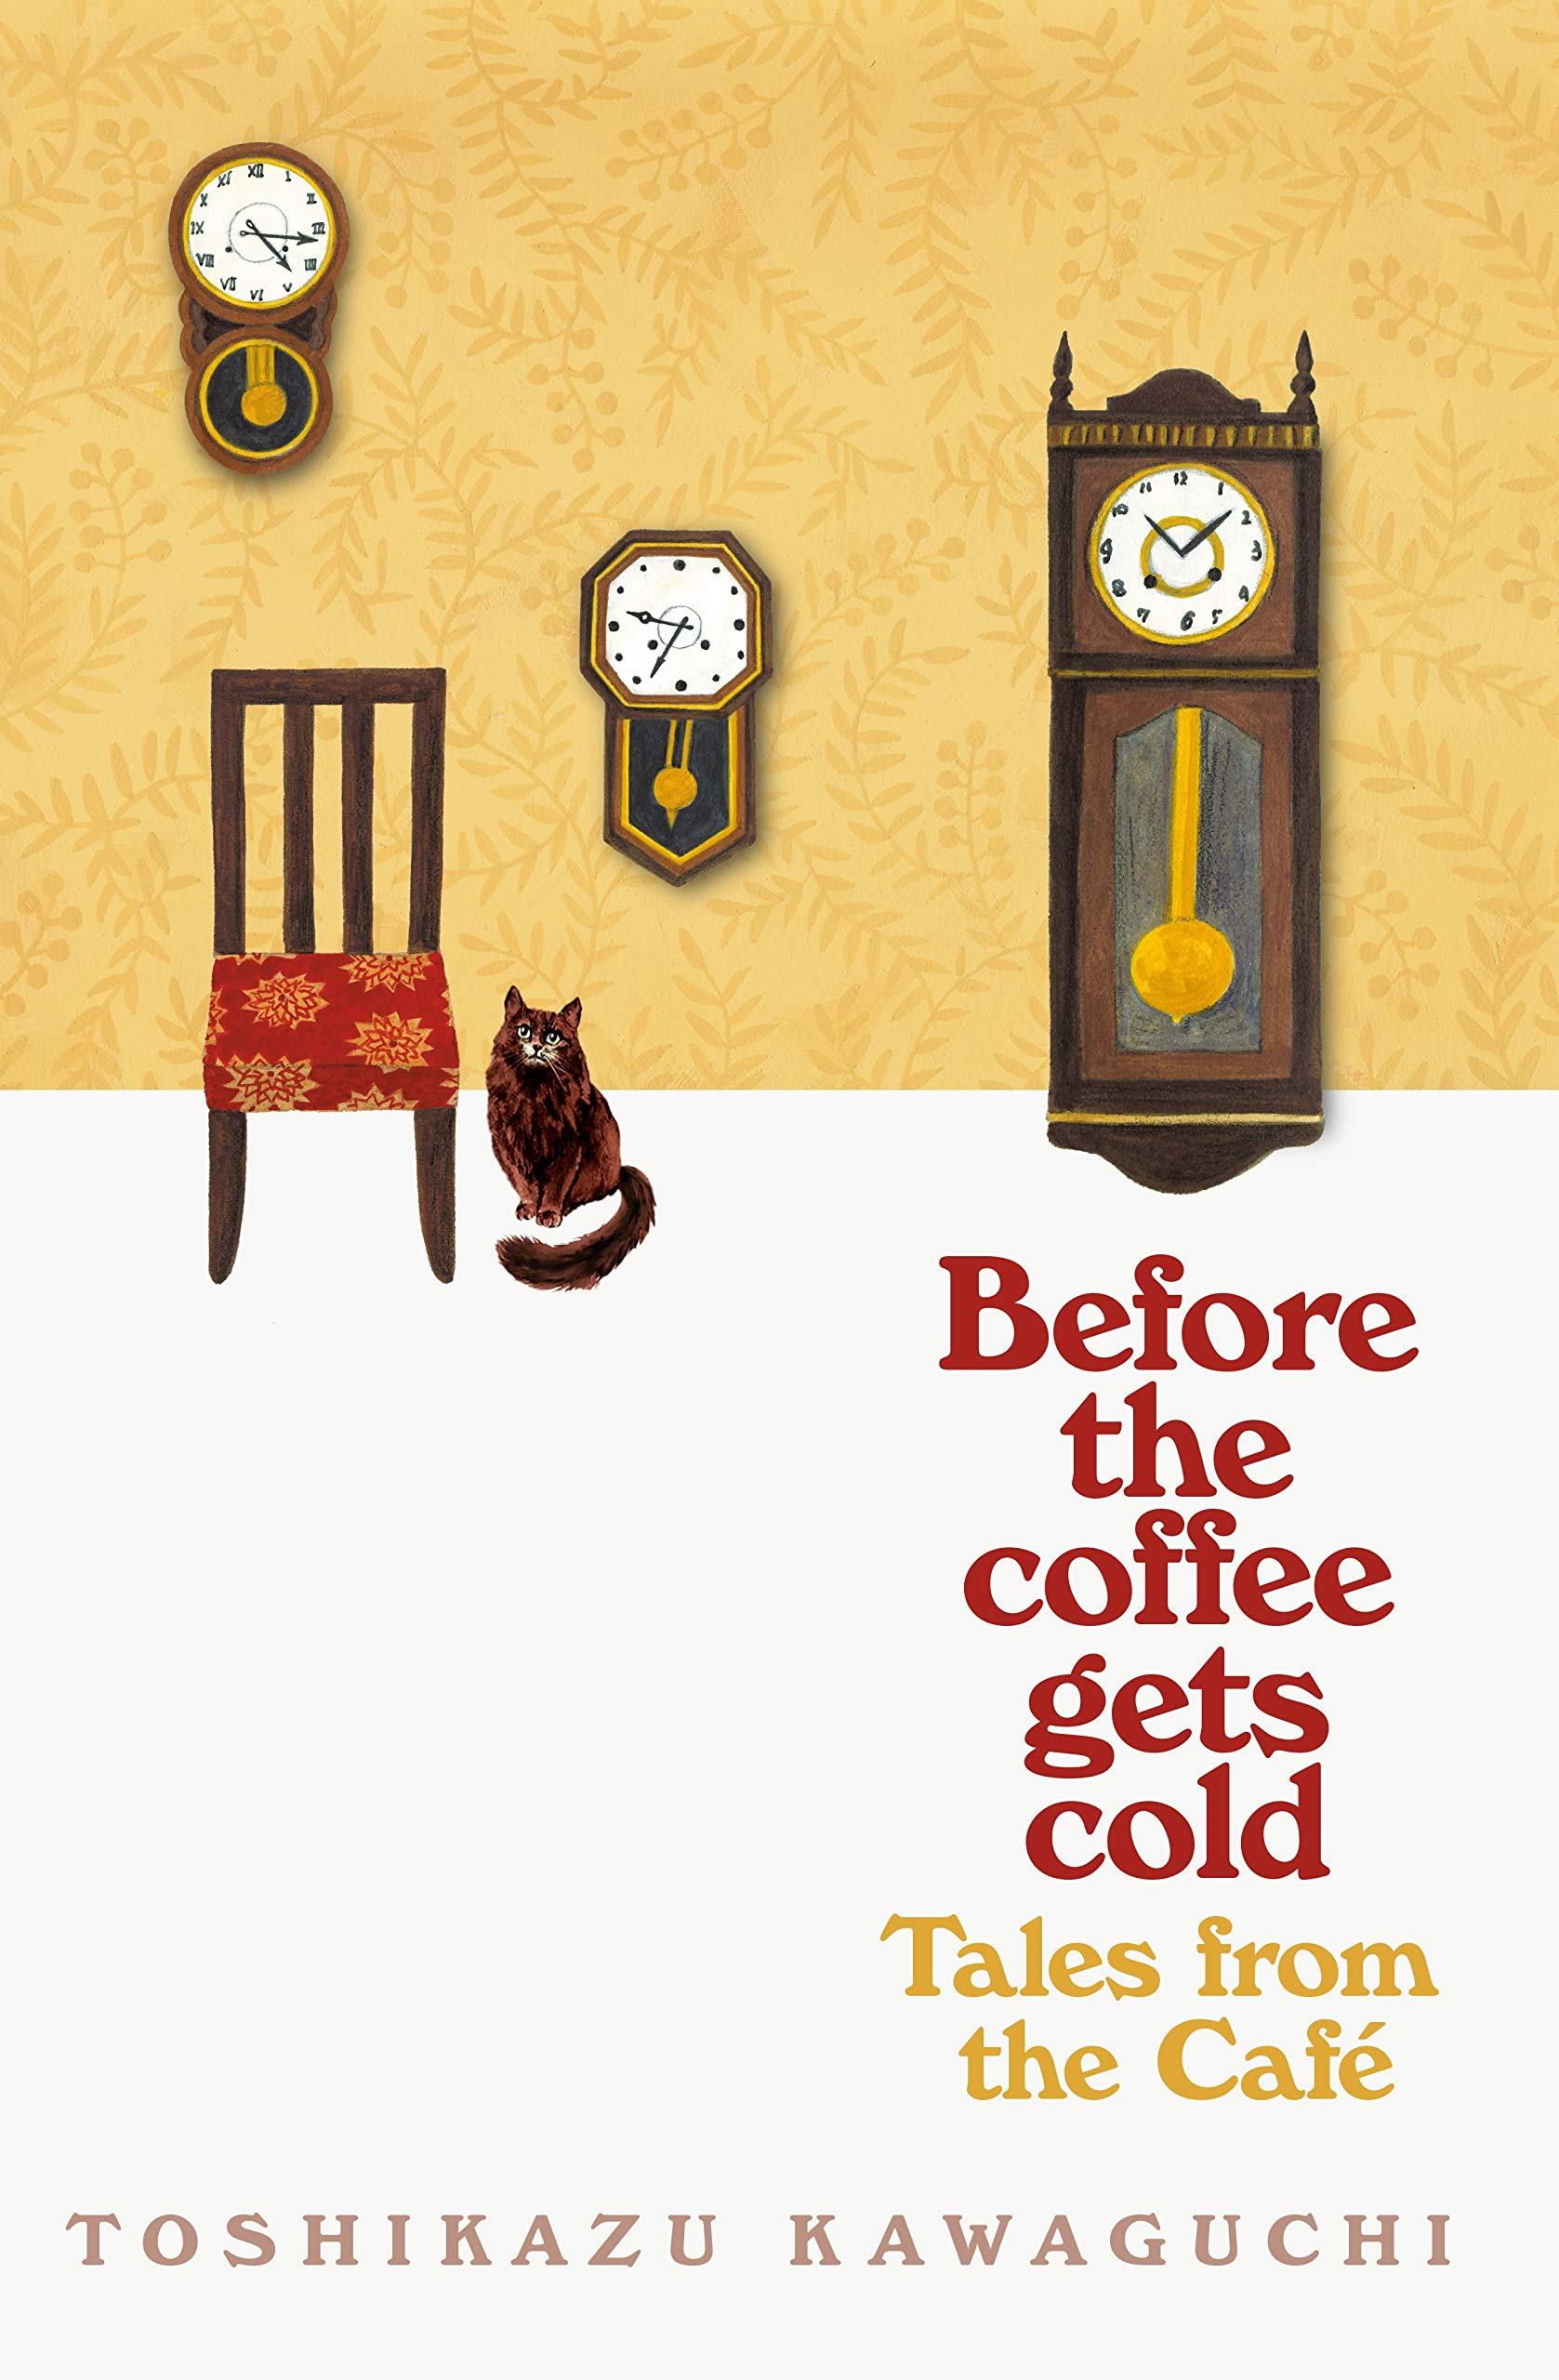 Tales from the Cafe: Before the Coffee Gets Cold 2